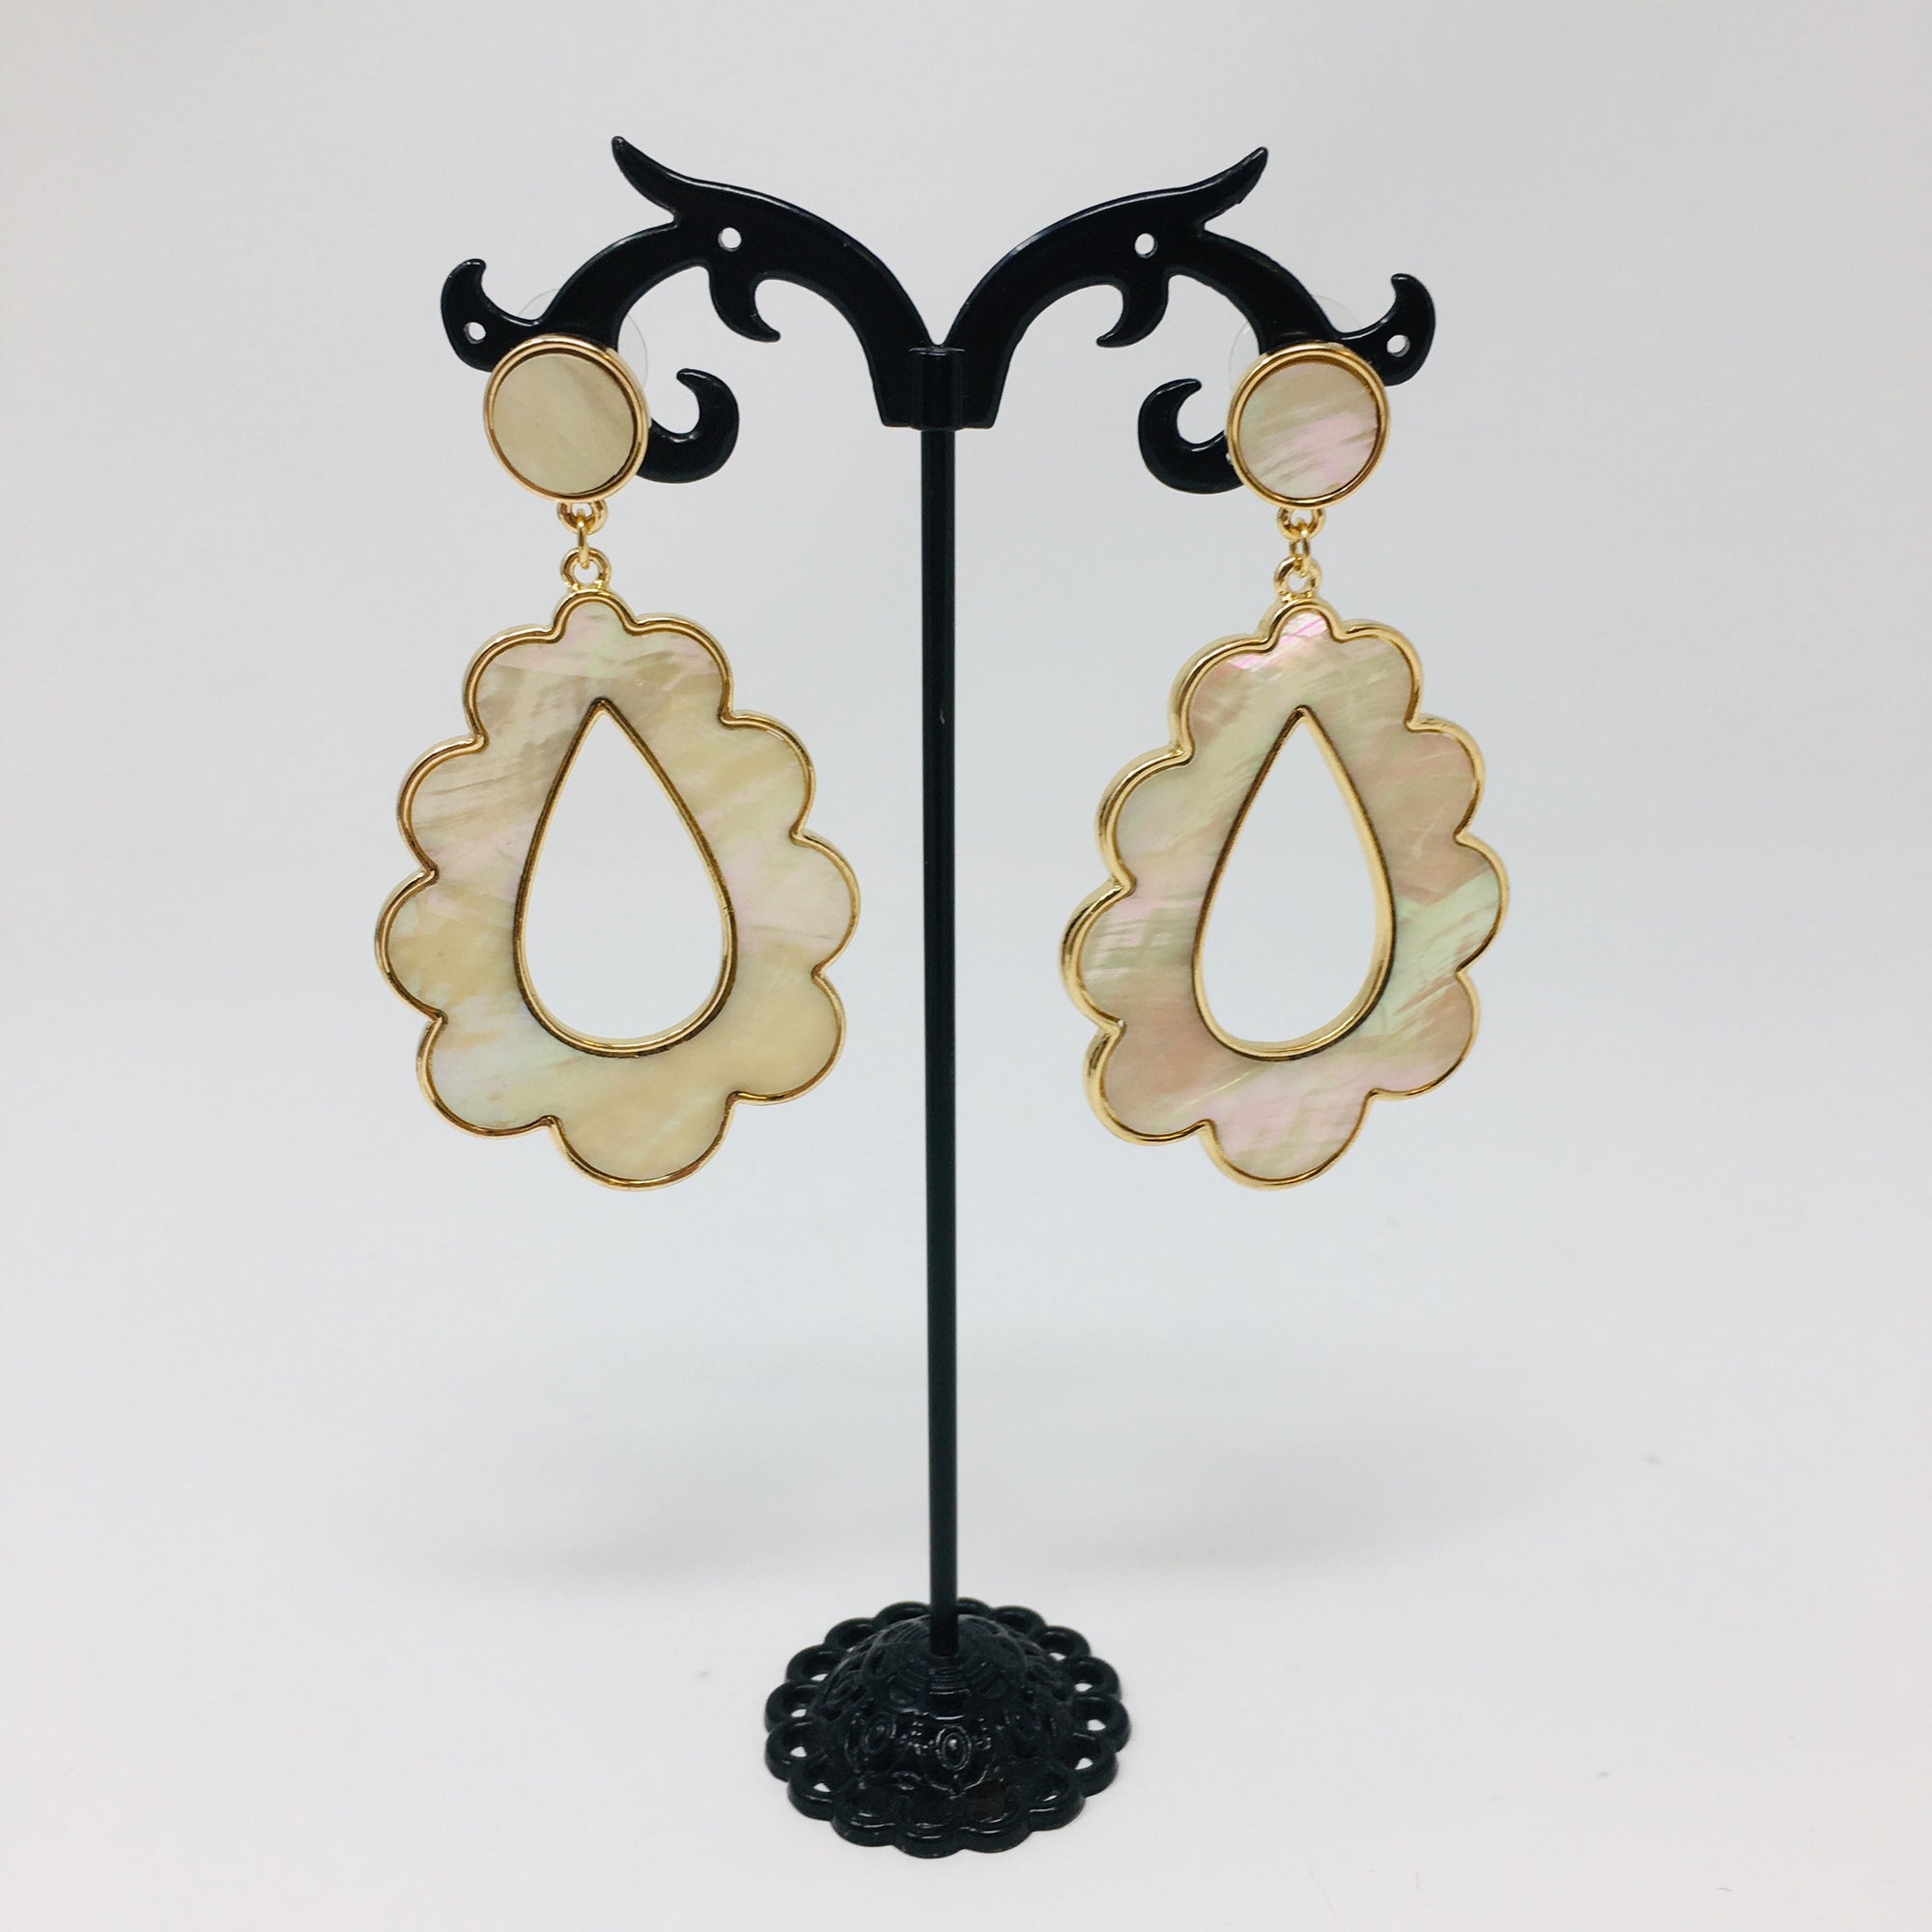 Scalloped teardrop shaped gold tone earrings with mother of pearl inserts shown on a white background